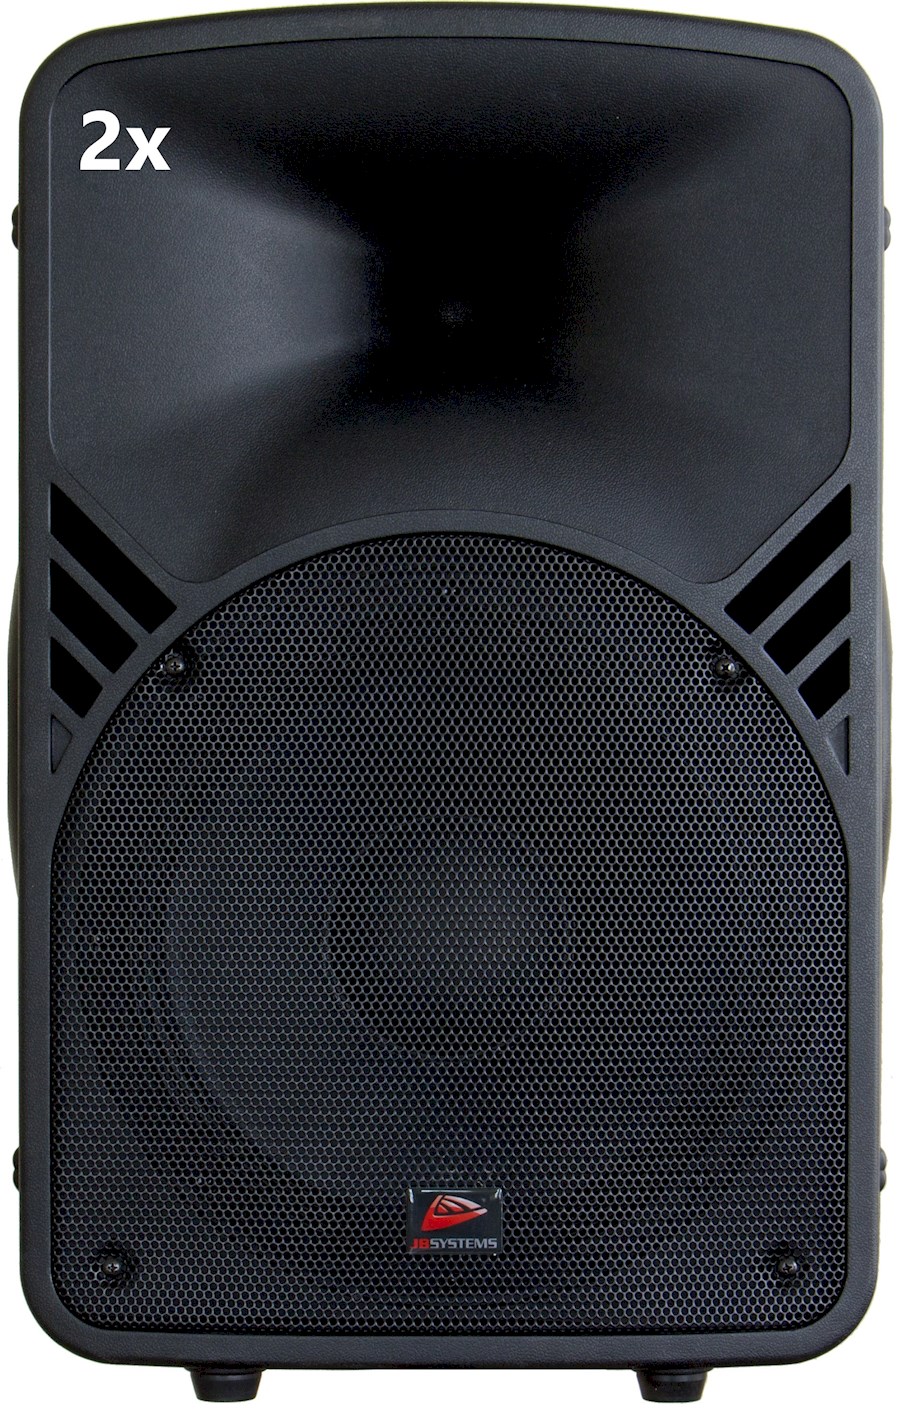 Rent 2x 12 inch top speaker... from Raoul